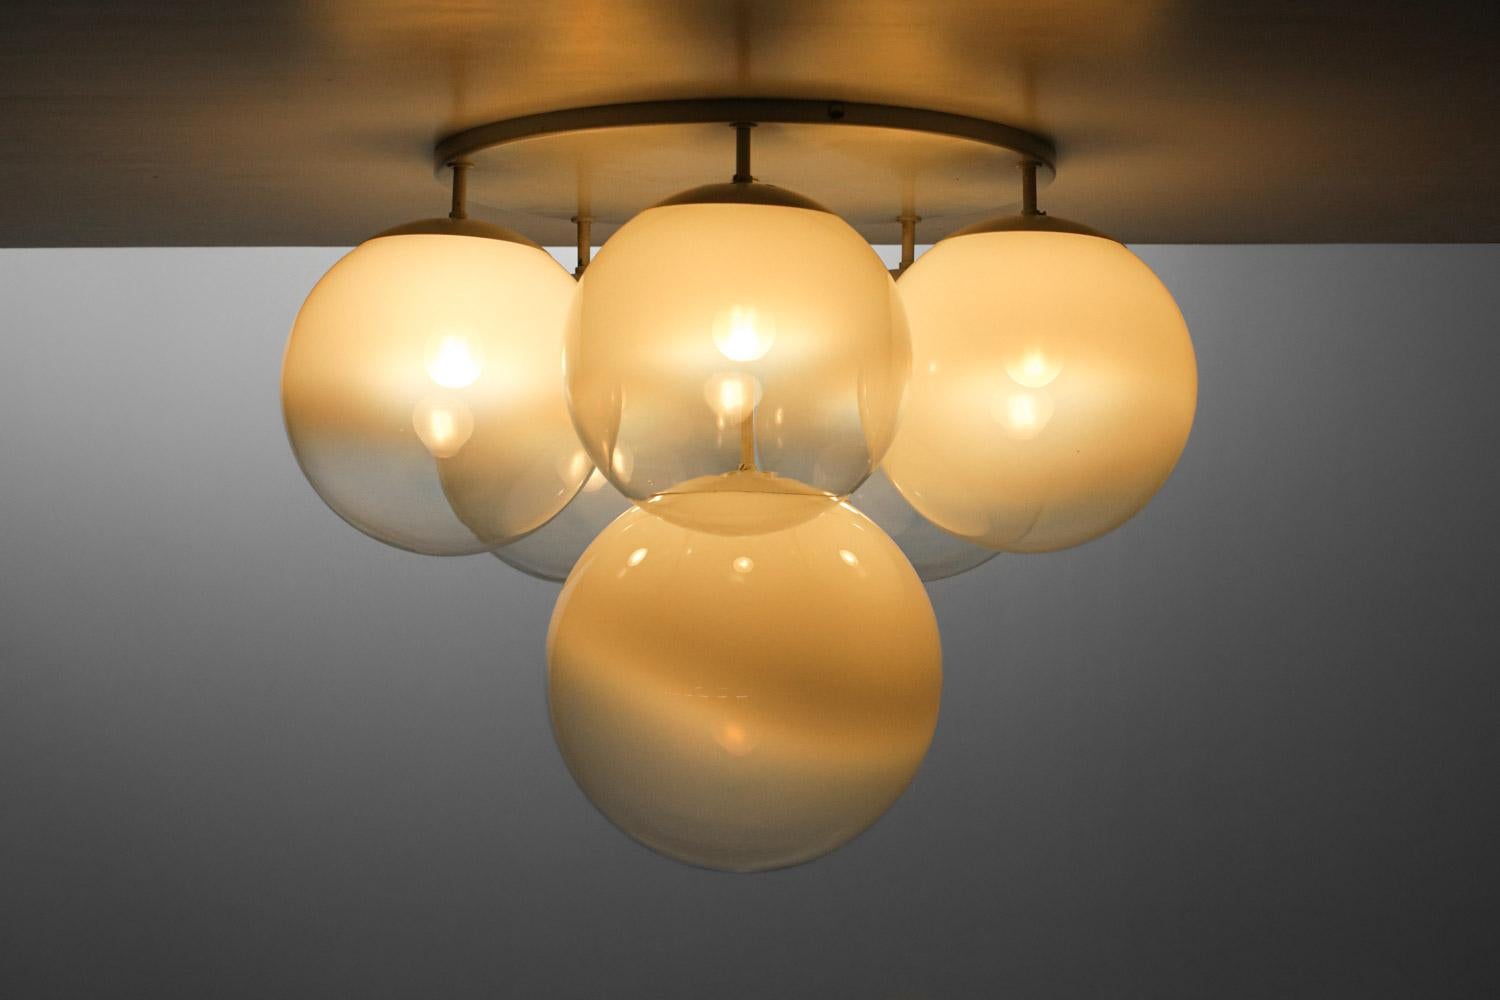 Pair of vintage Italian ceiling lights from the 70's created in the style of Gino Sarfatti's work of the time.  Structure in white lacquered metal (original paint), these ceiling lights are composed of 6 smoked Murano glass globes in the tones of